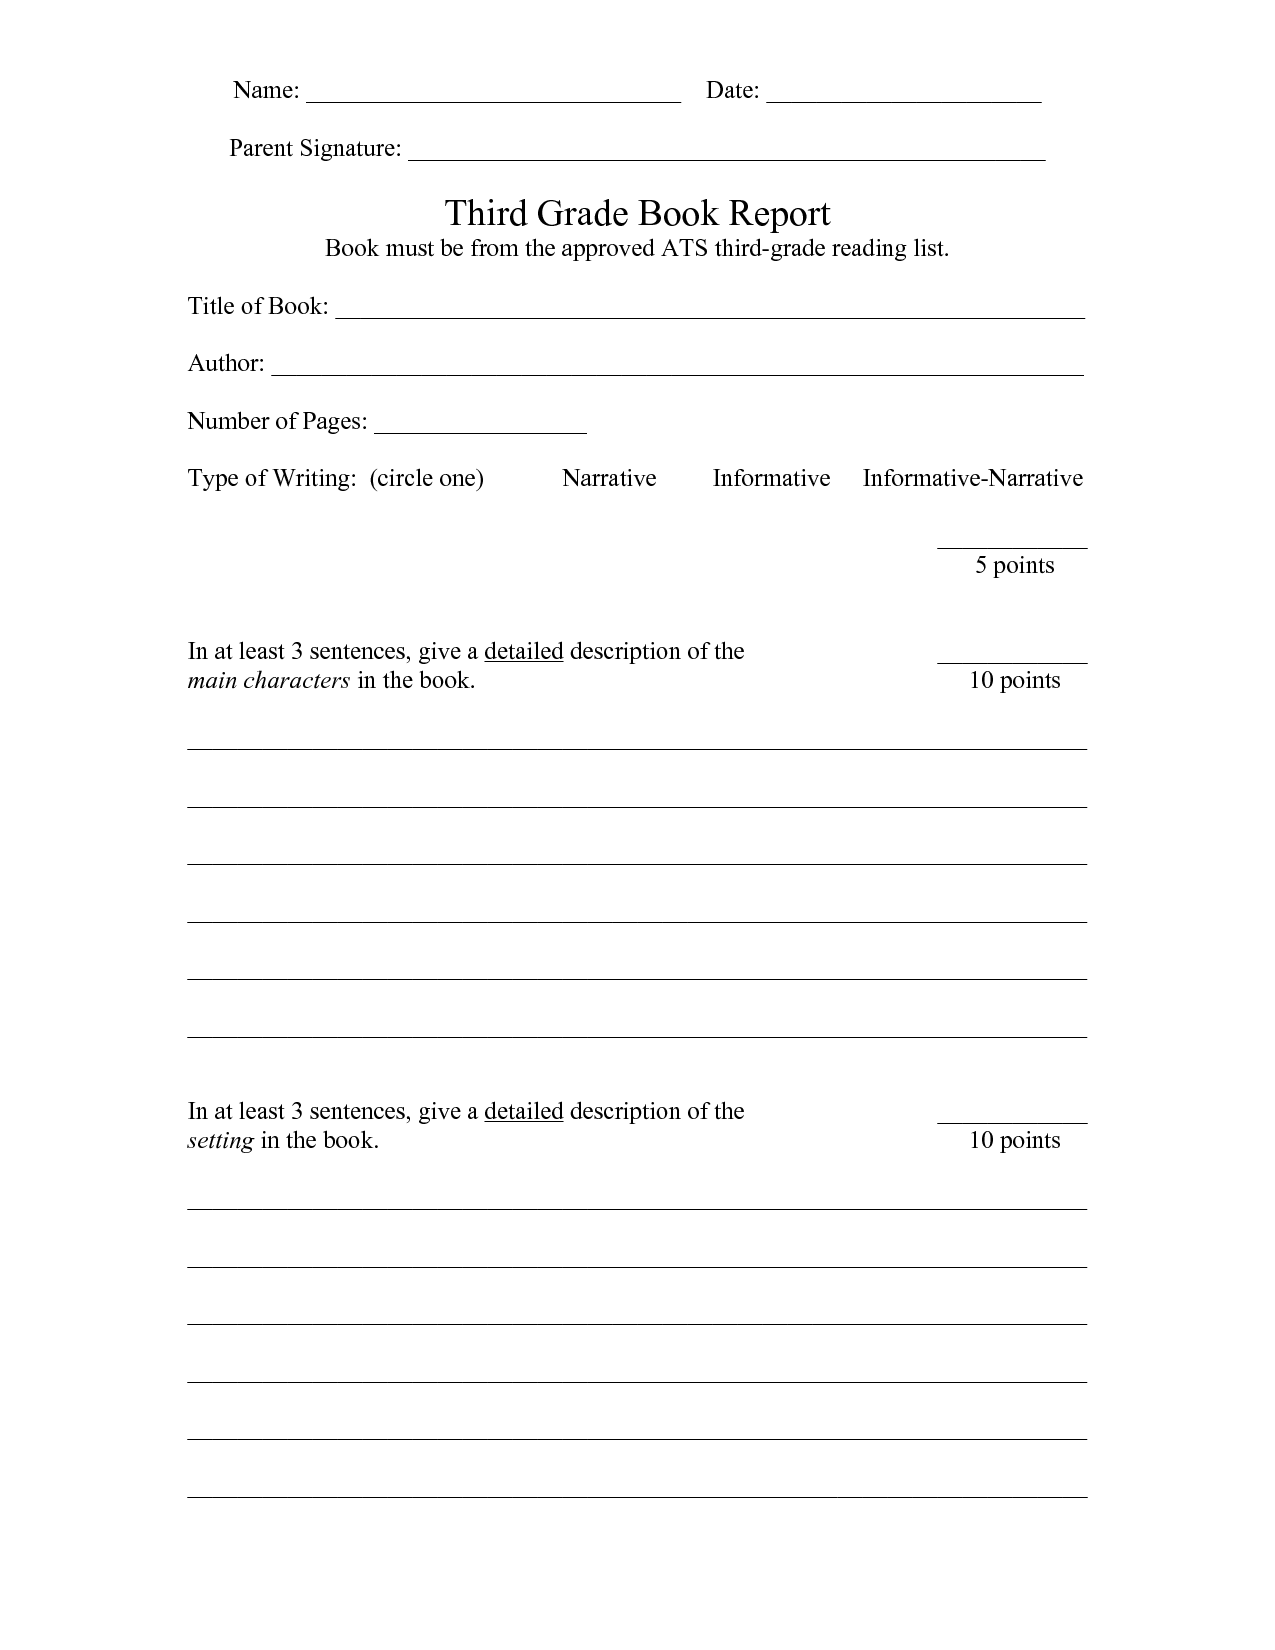 Book report templates for 3rd graders